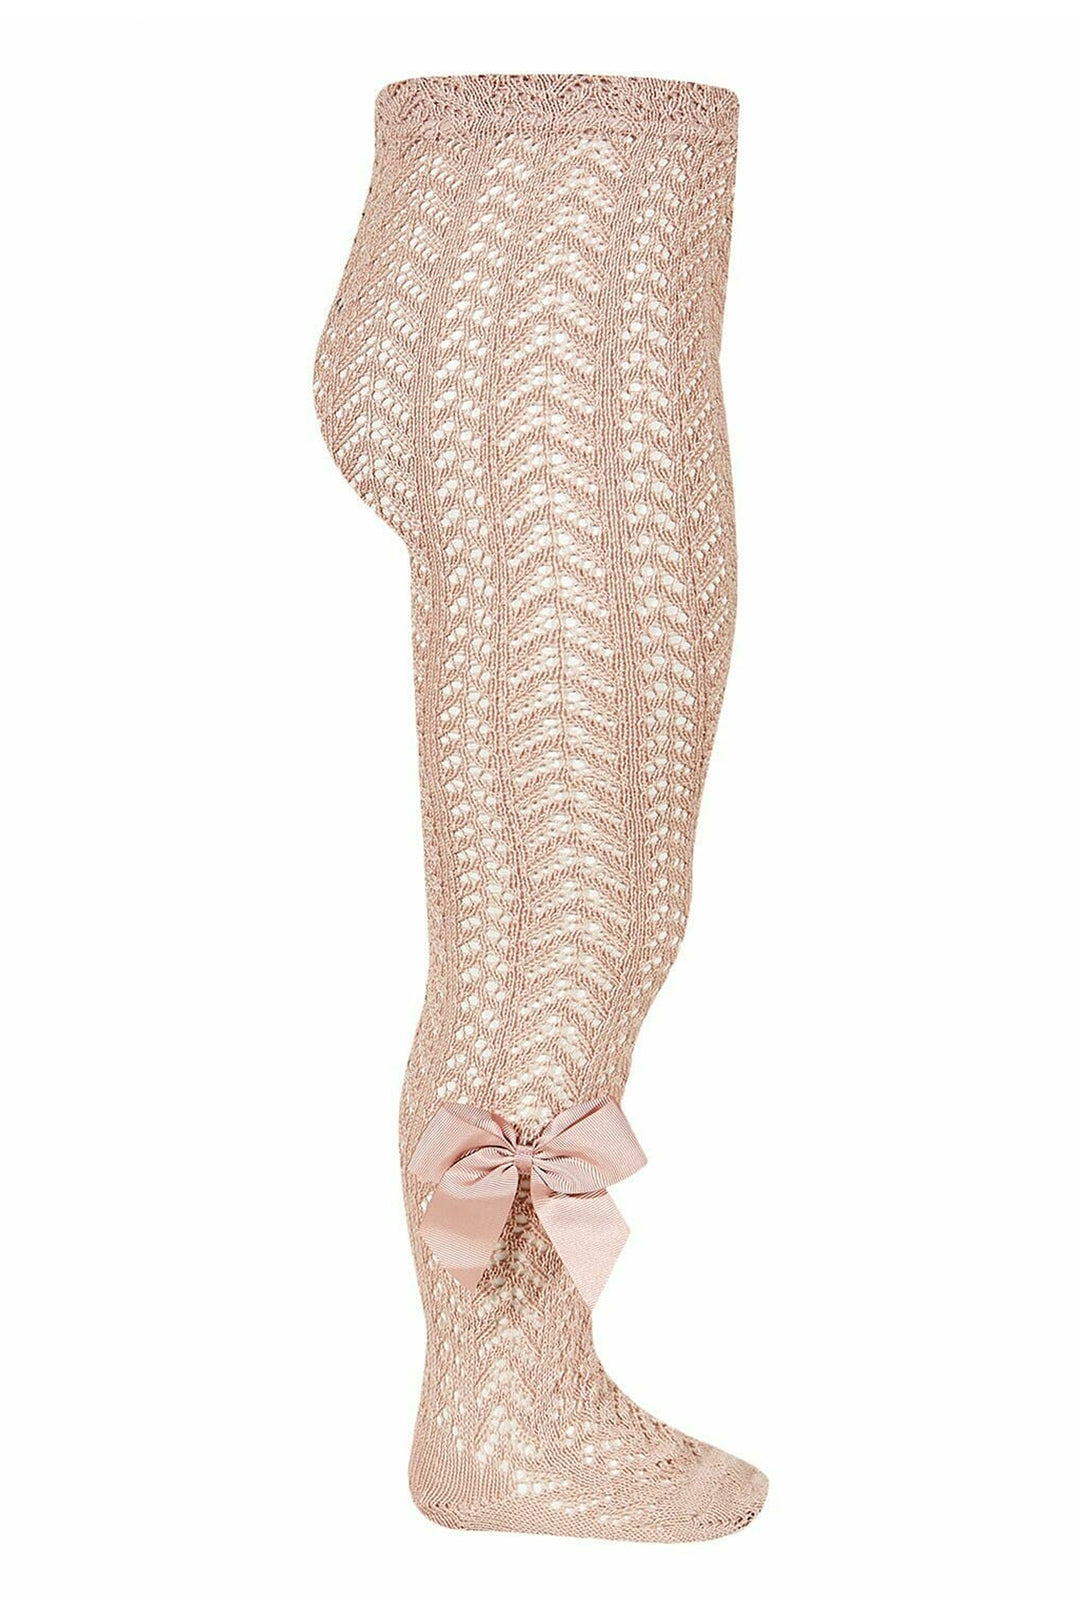 Condor Old Rose Lace Openwork Bow Tights | Millie and John